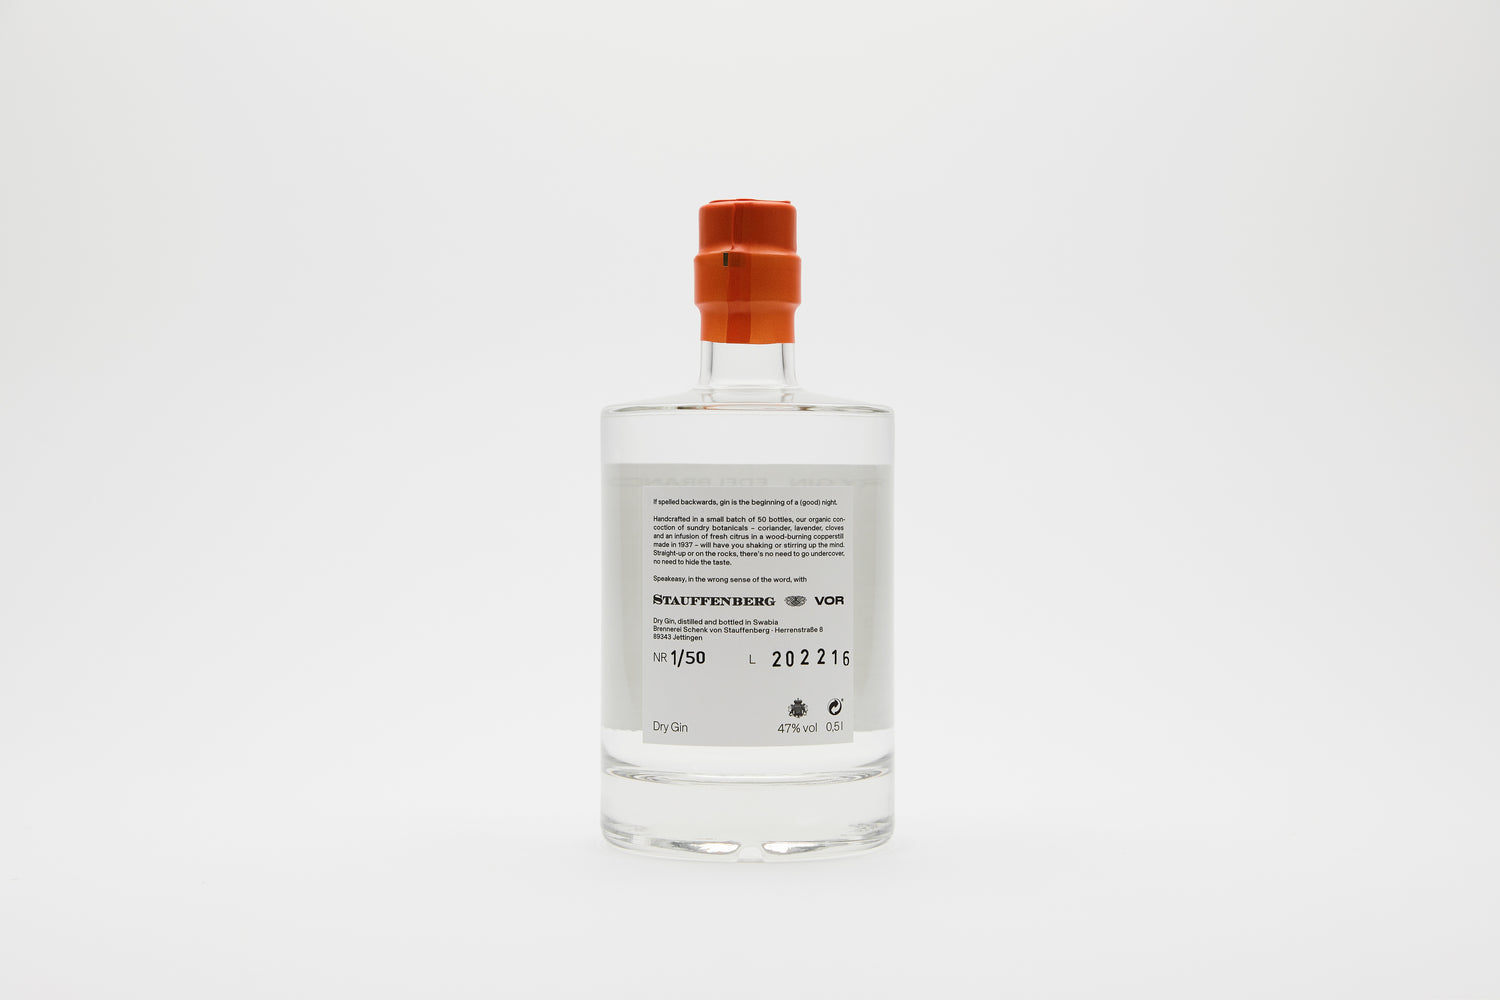 Organic gin infused with sundry botanicals. Made in Germany.